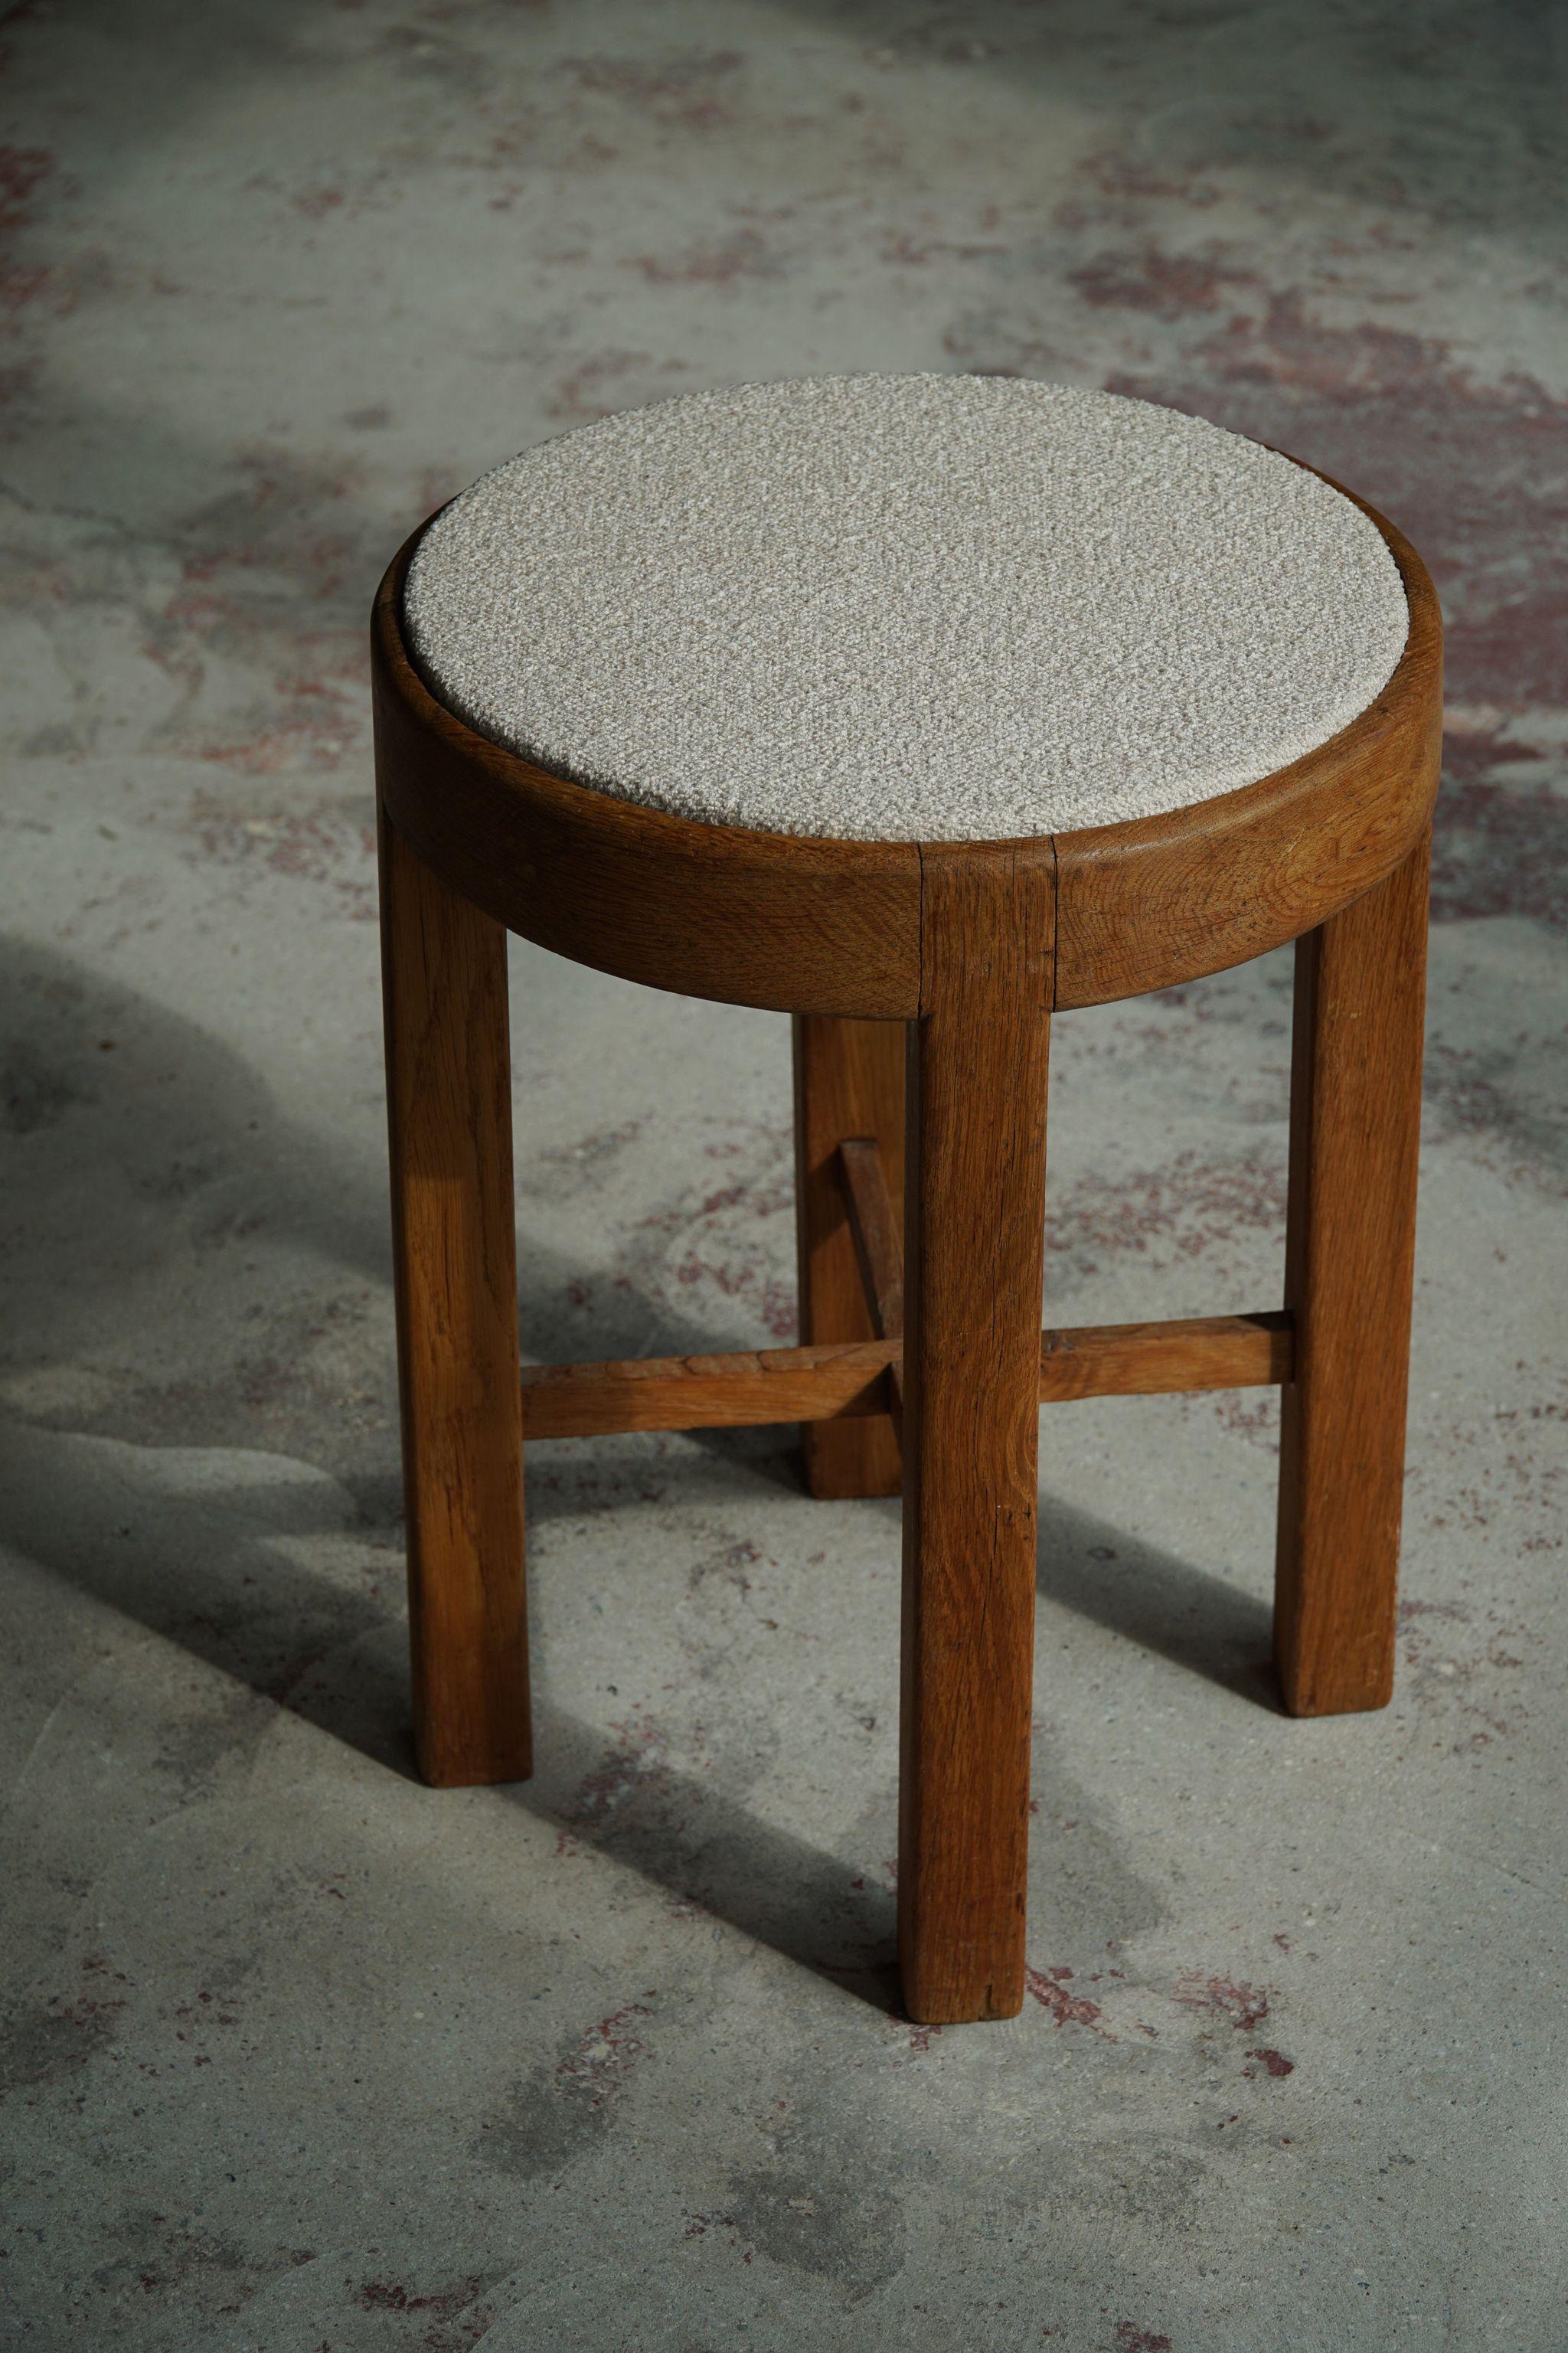 Danish Mid Century Stool in Oak and Reupholstered in Bouclé Wool, ca 1950s For Sale 3